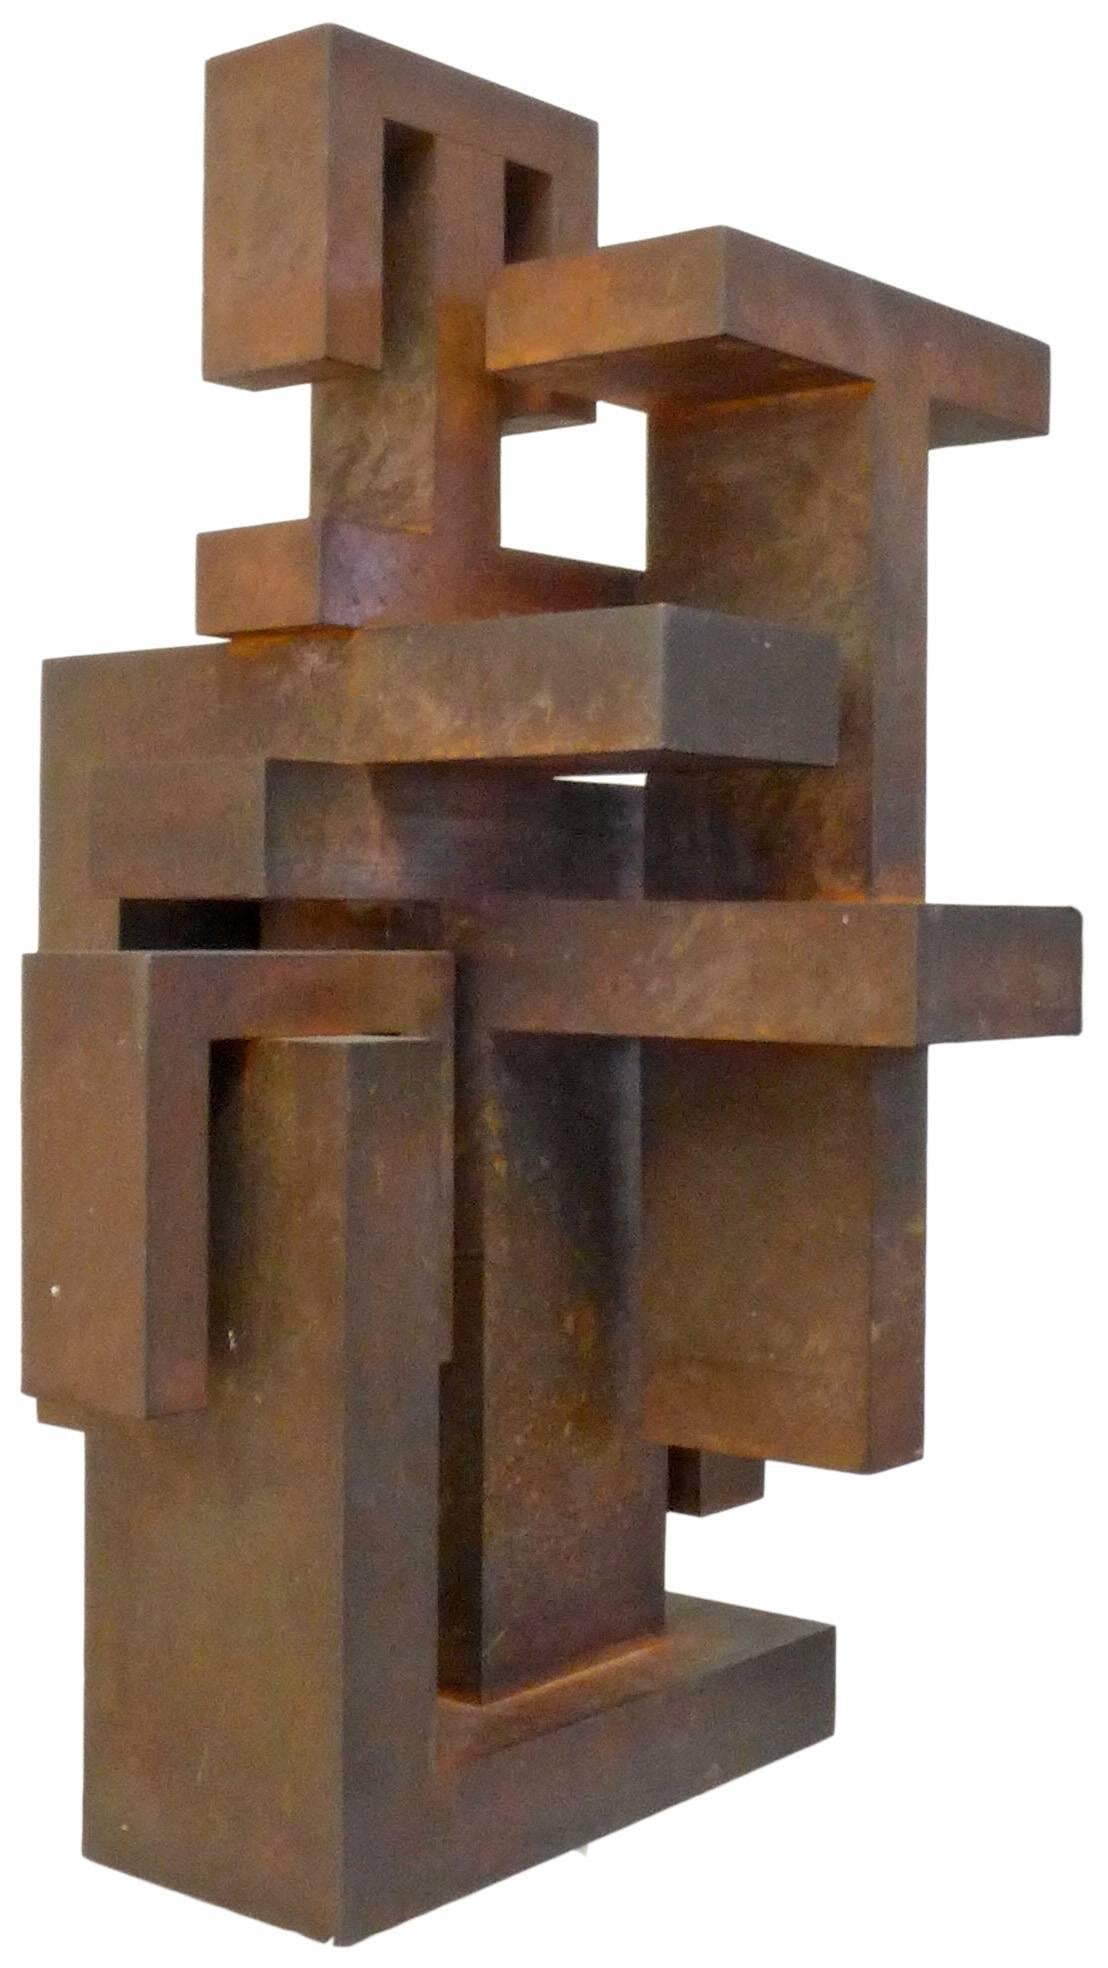 An anonymous but extraordinary solid steel, modernist sculpture. A strong geometric composition of the highest level of execution constructed of masterfully-welded, solid-stock steel bar. An incredible, heavy and spectacular example of mid-20th